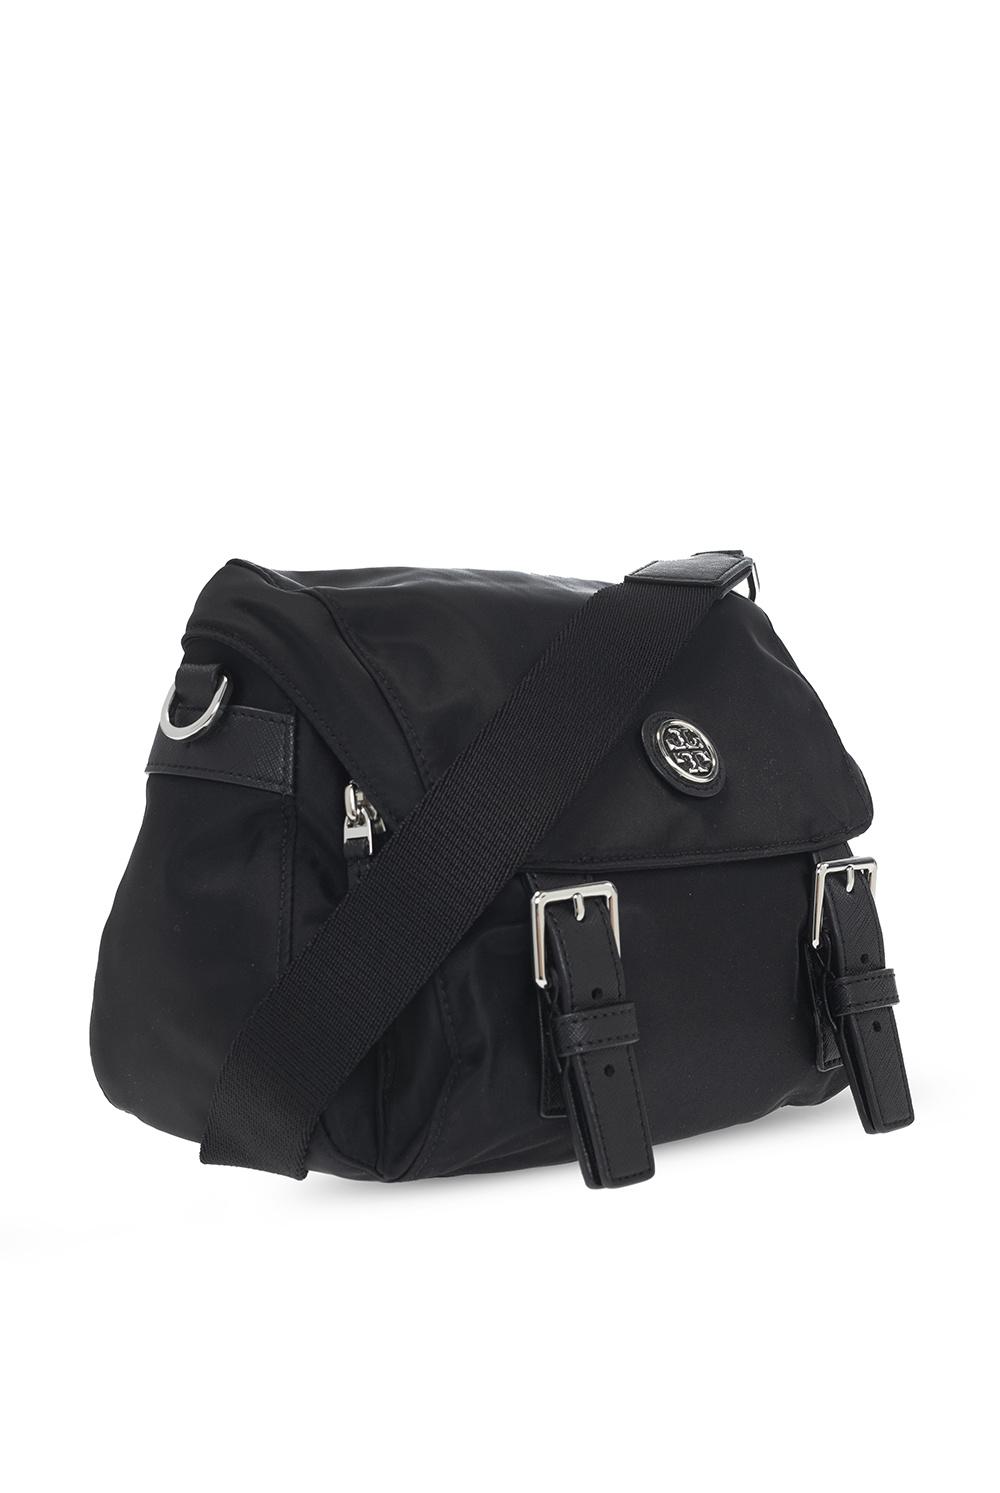 Tory Burch Synthetic Nylon Small Messenger in Black - Save 19% - Lyst